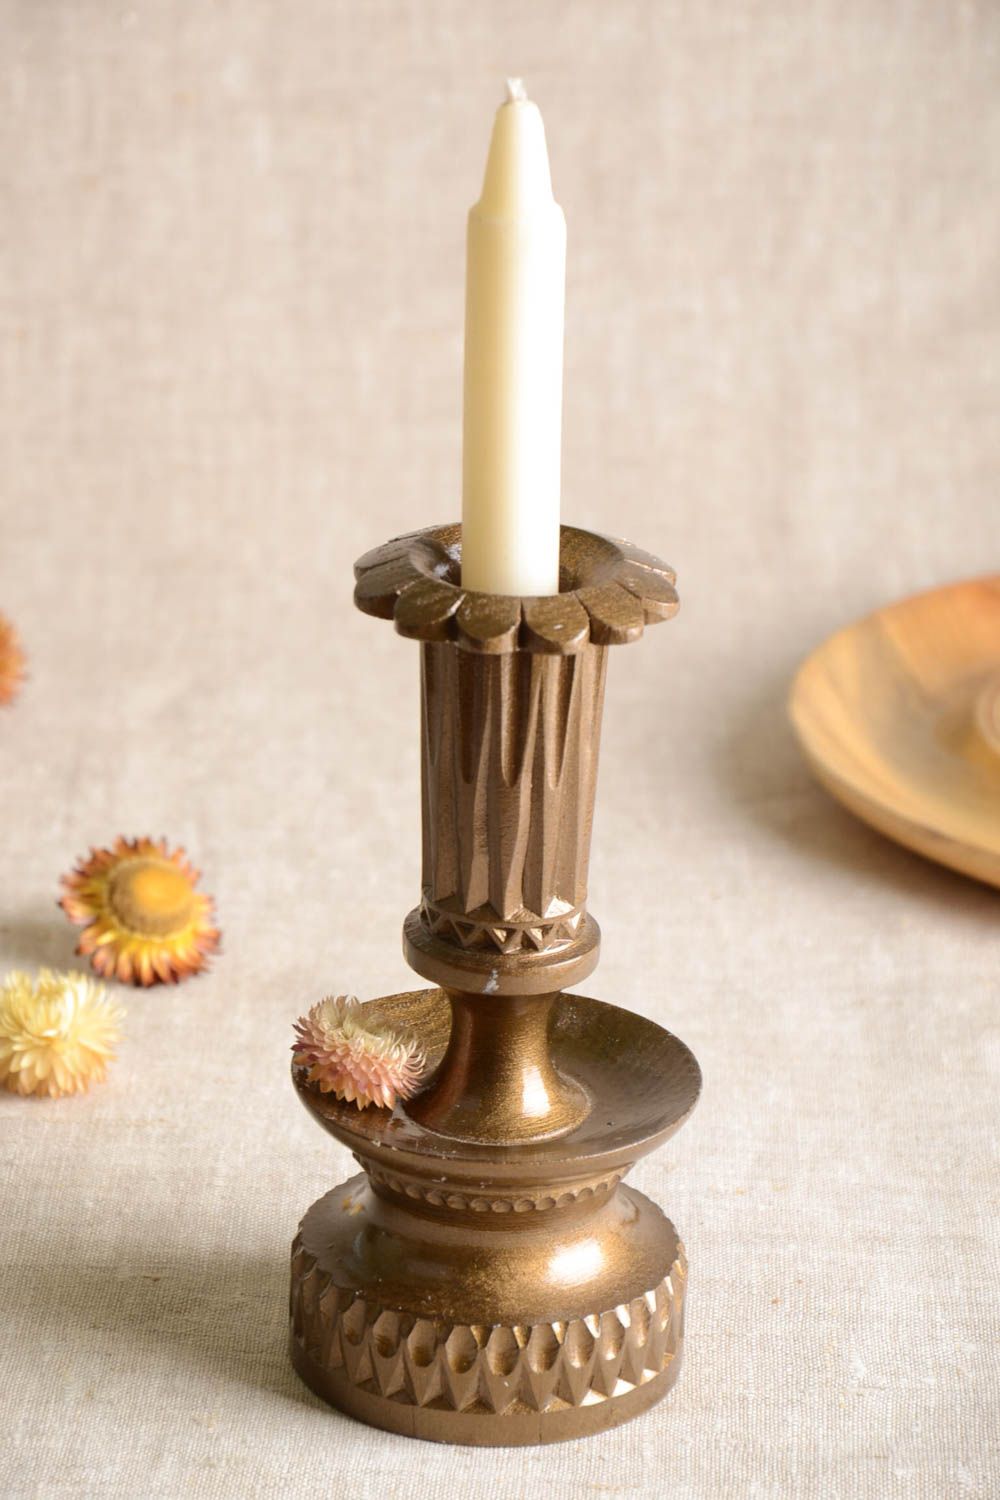 Handmade candlestick wooden candle holder table decor home decor gift ideas photo 1